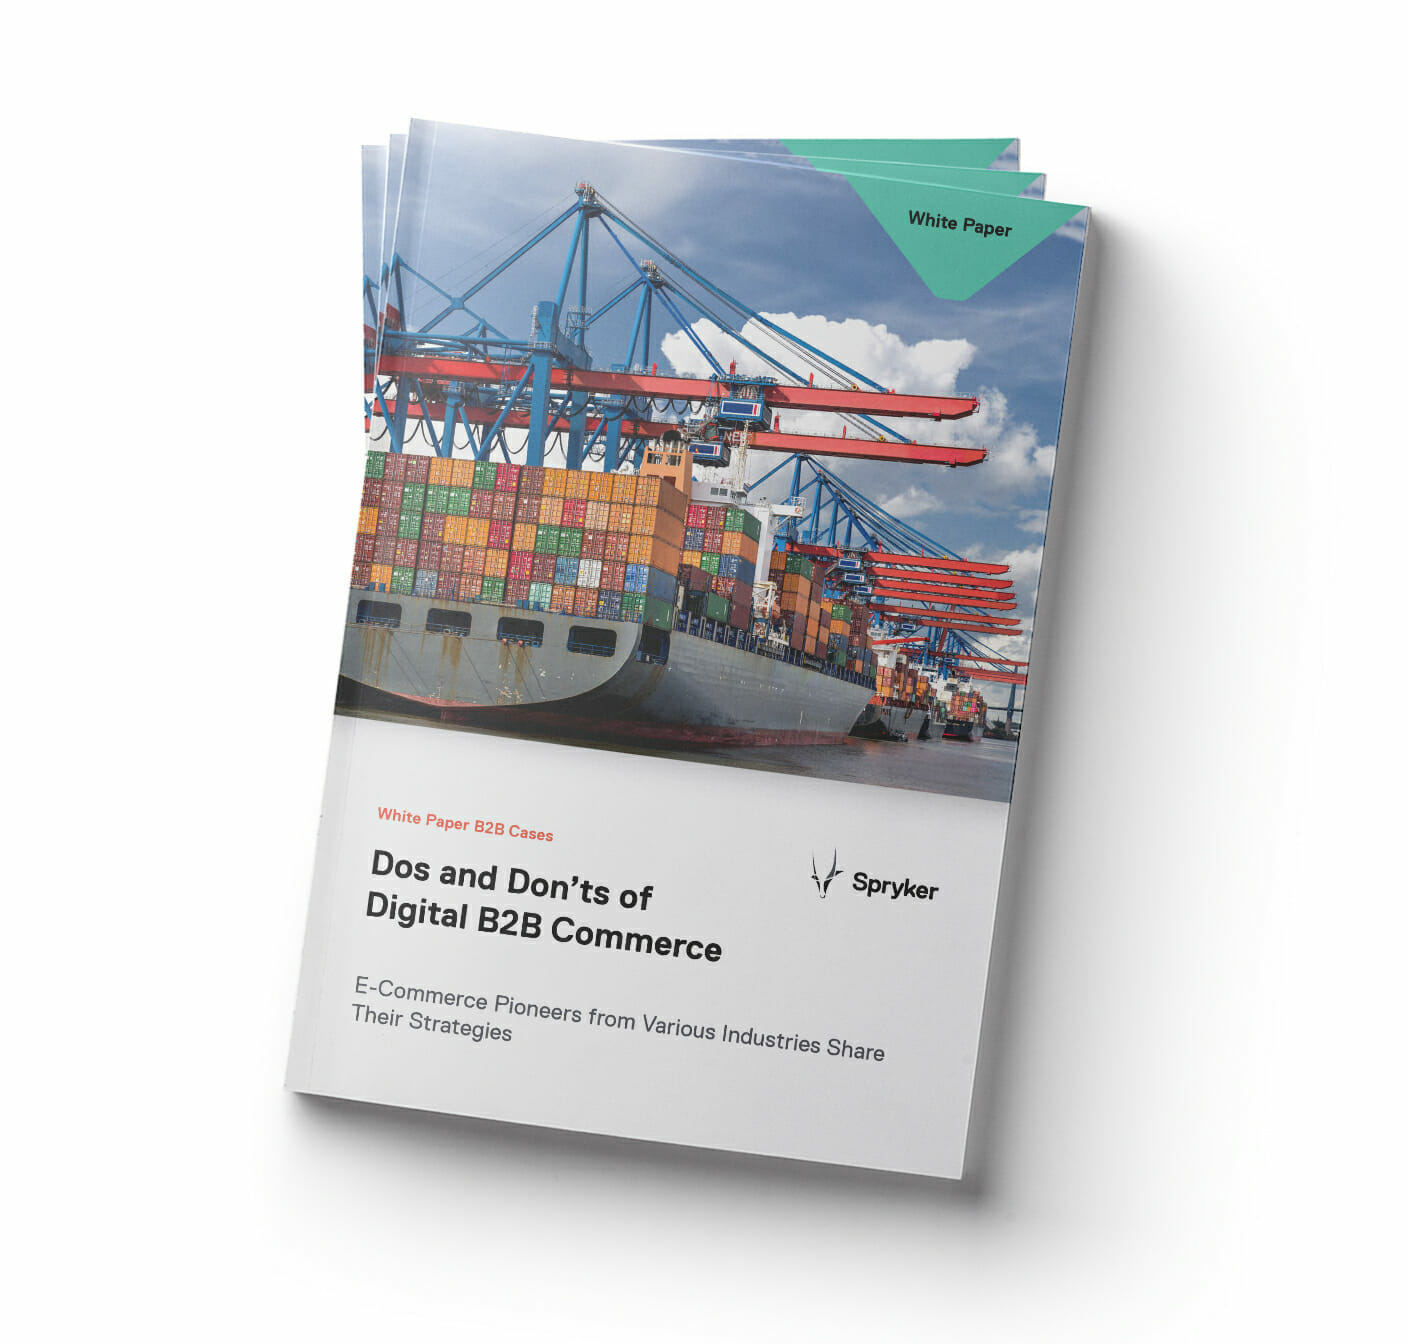 Whitepaper Cover: Dos and don'ts of Digital B2B Commerce